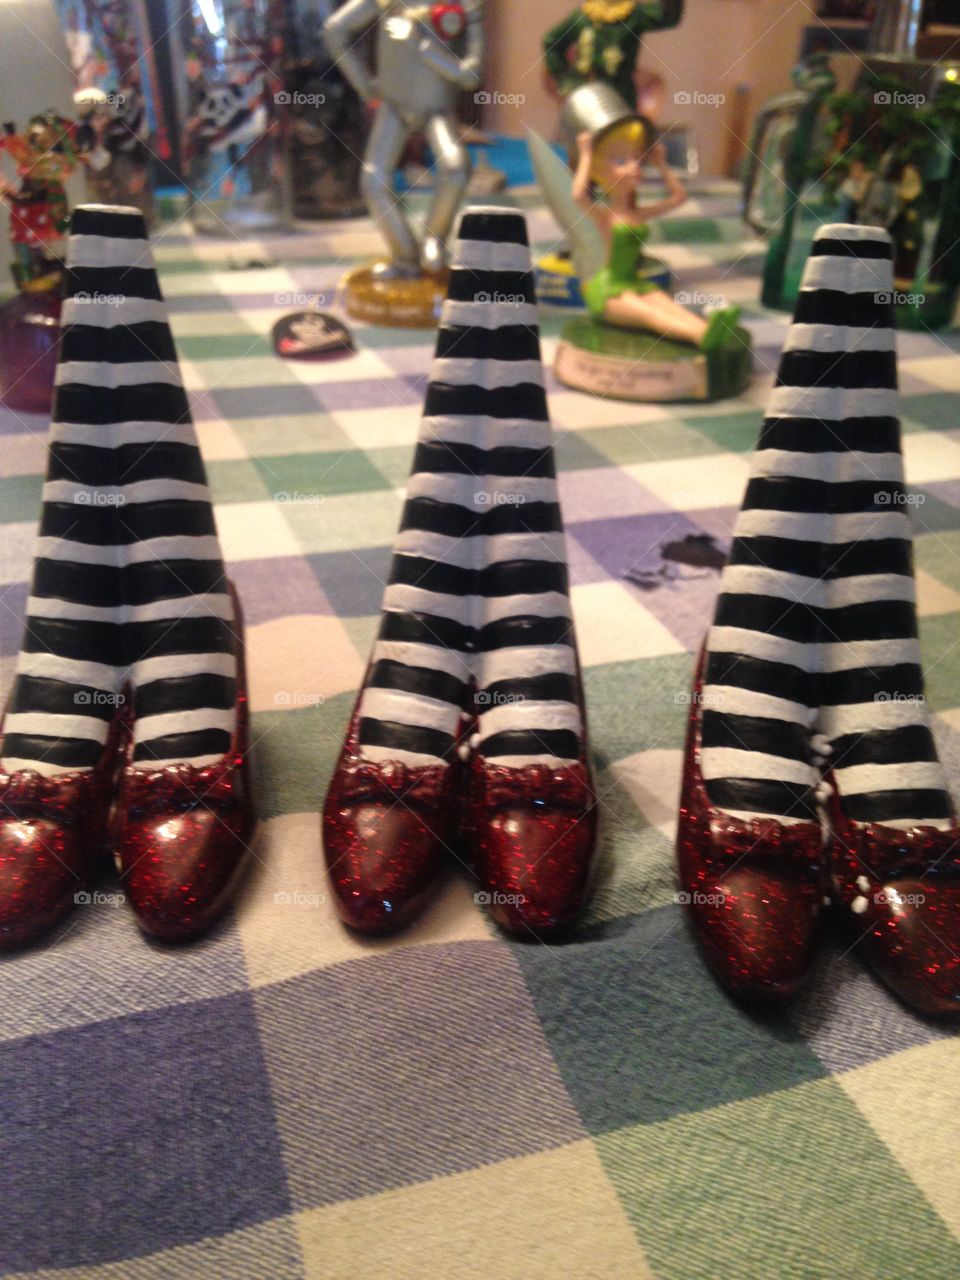 The Wizard of  Oz-A pair of Zebra stripes socks and shoes from Dorothy.